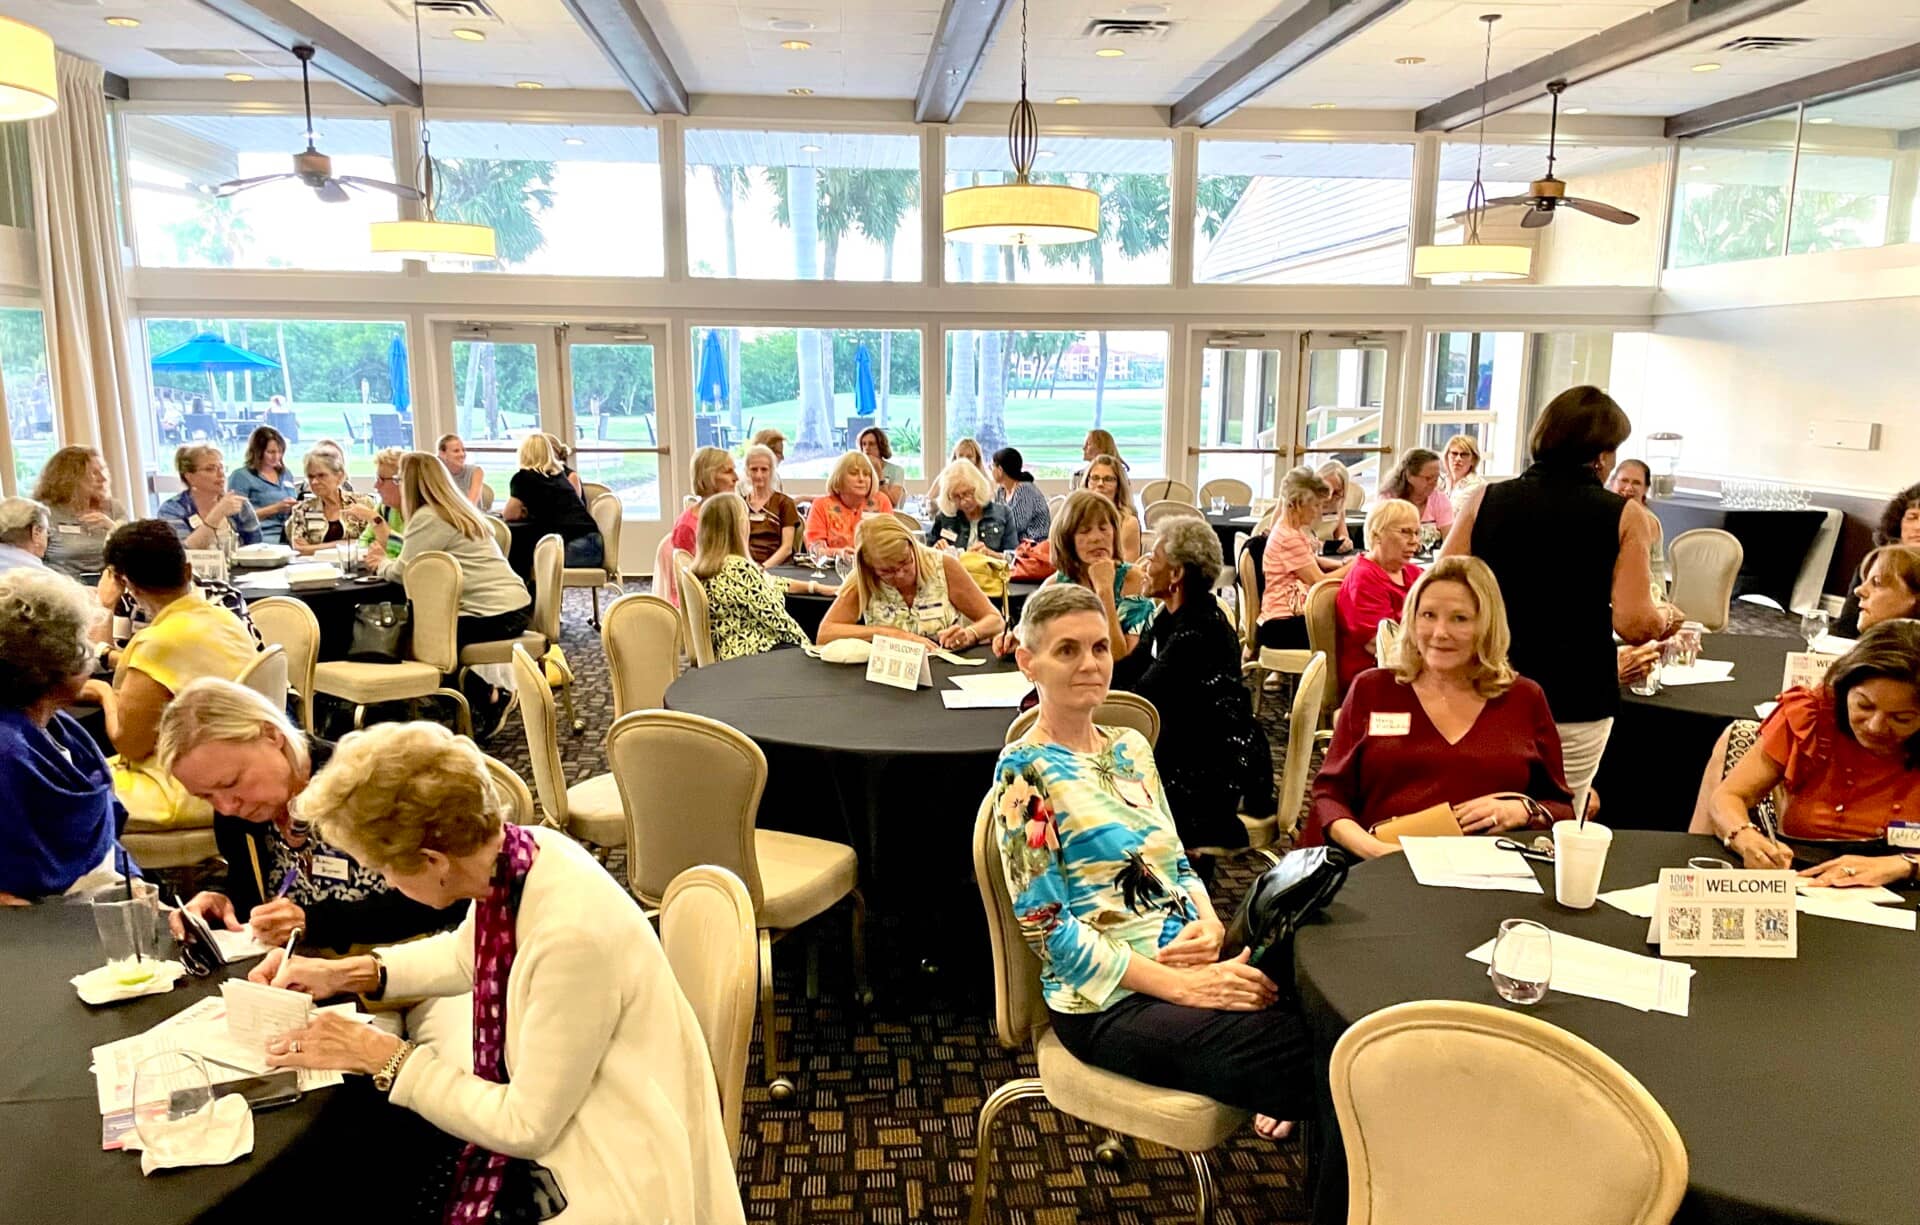 The 100 Women Who Care Pinellas County members meet each quarter for an hour to dedicate $100, learn about local nonprofits, and choose a charity to receive a collective donation.